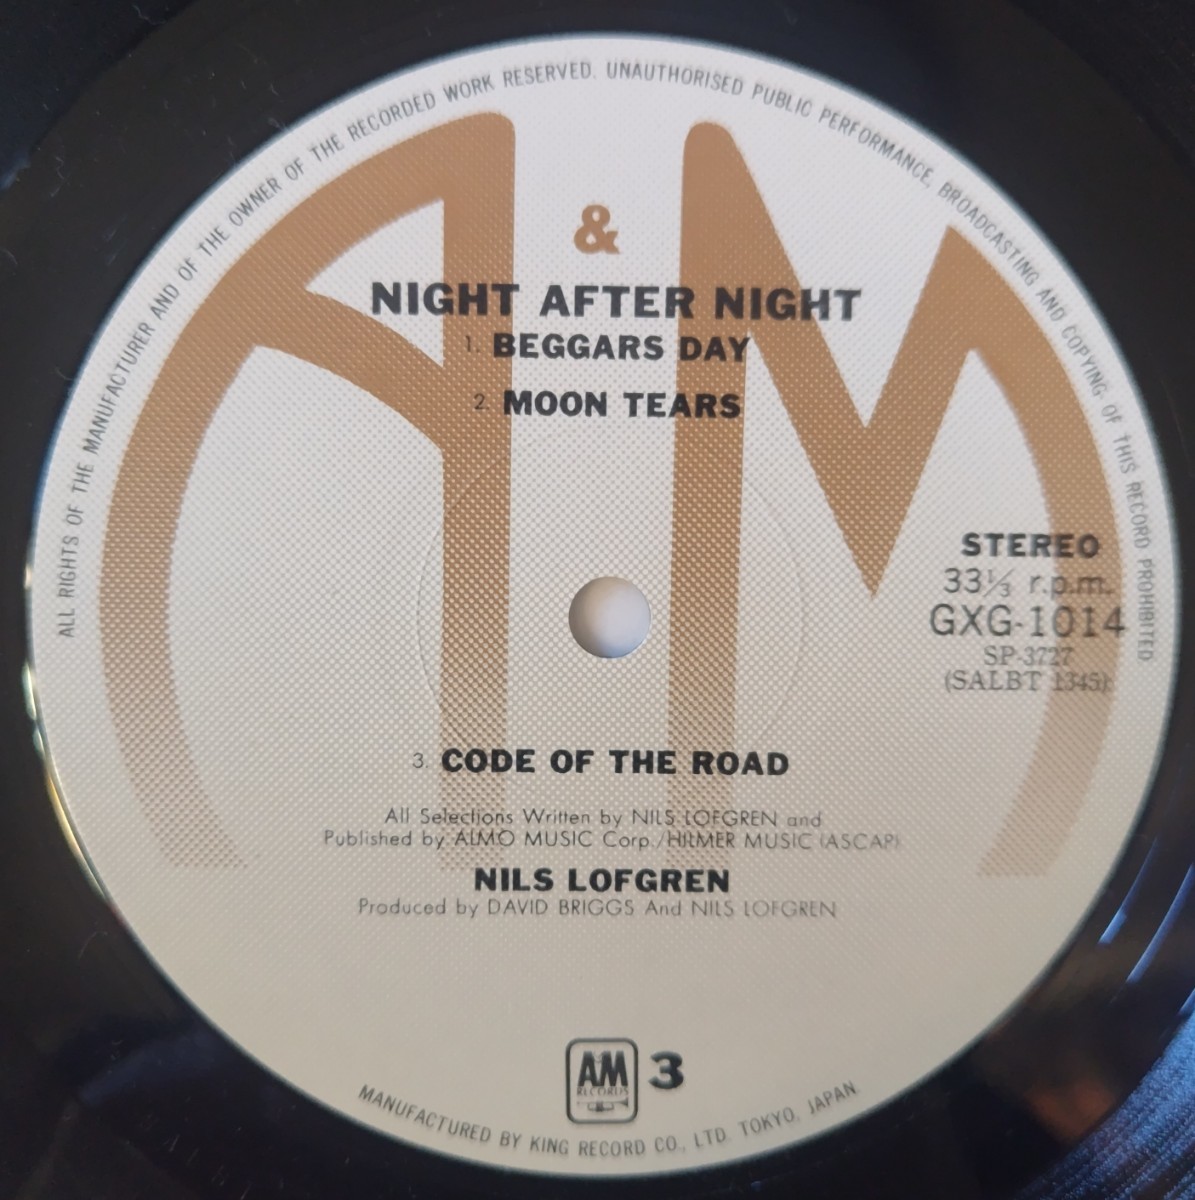 Nils Lofgren Night After Night/1977 year domestic record 2 sheets set A&M Records GXG 1013/14